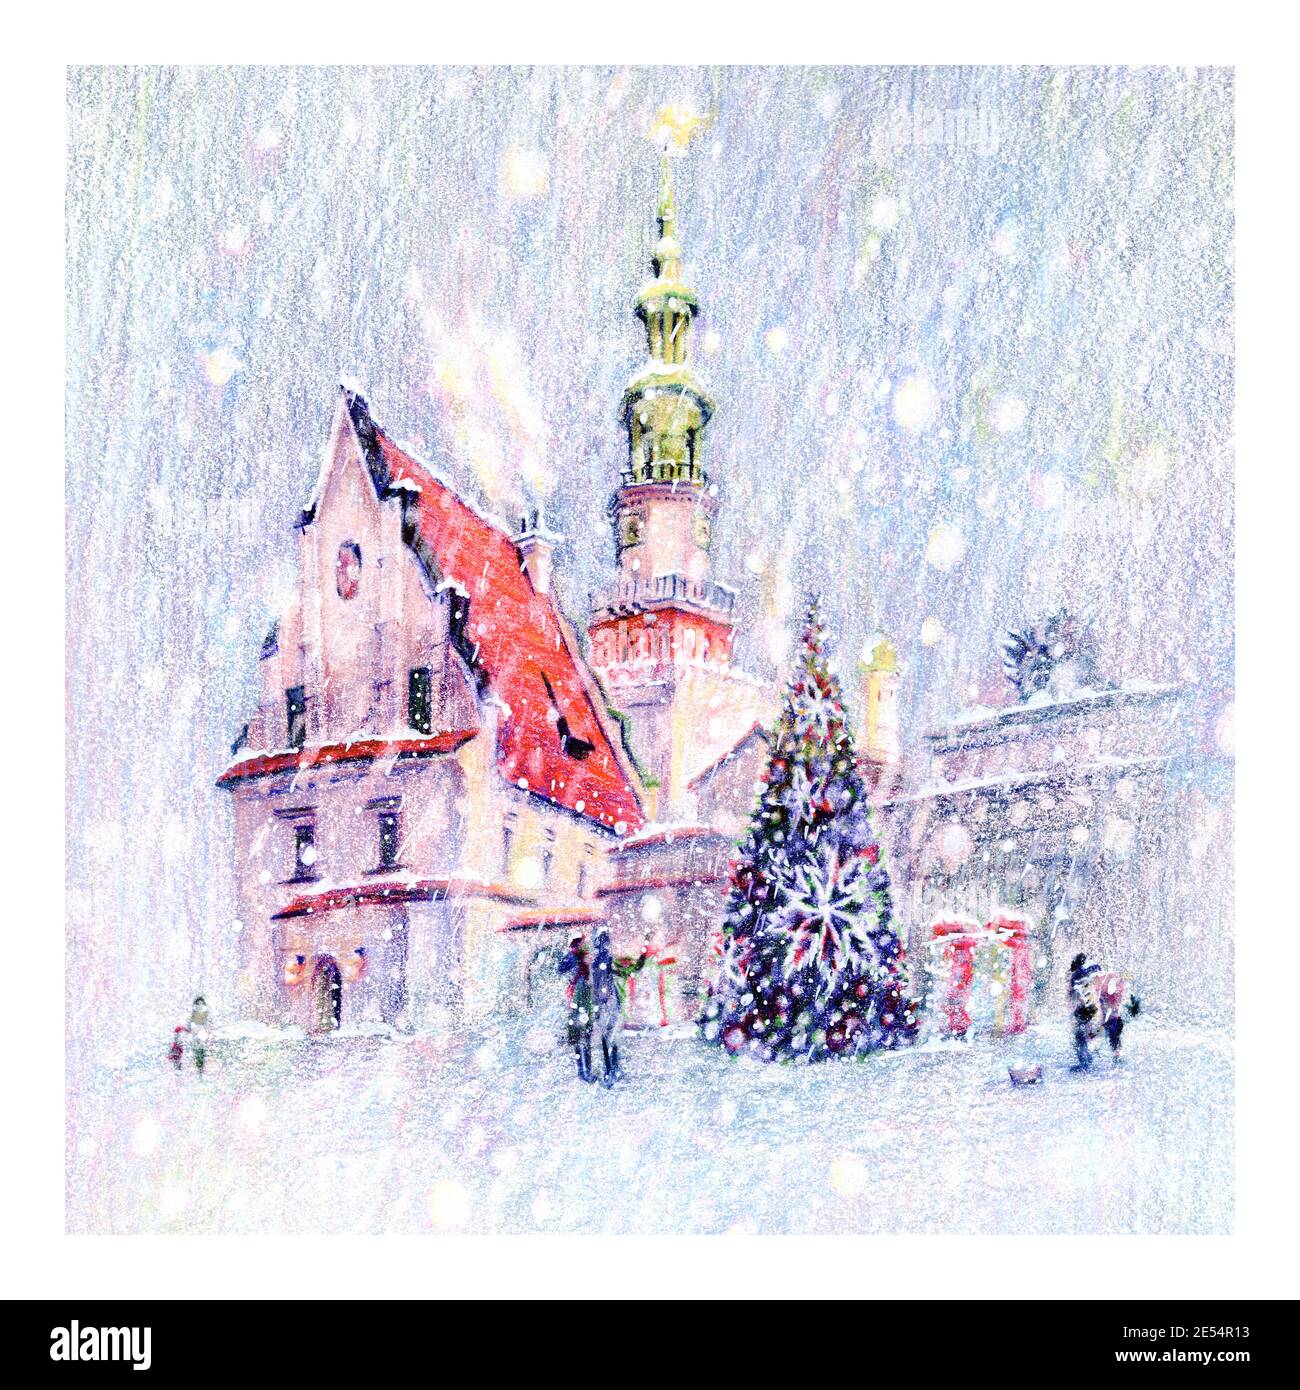 Coplored pencils sketch of snowy Christmas Old market square in Poznan, Poland Stock Photo